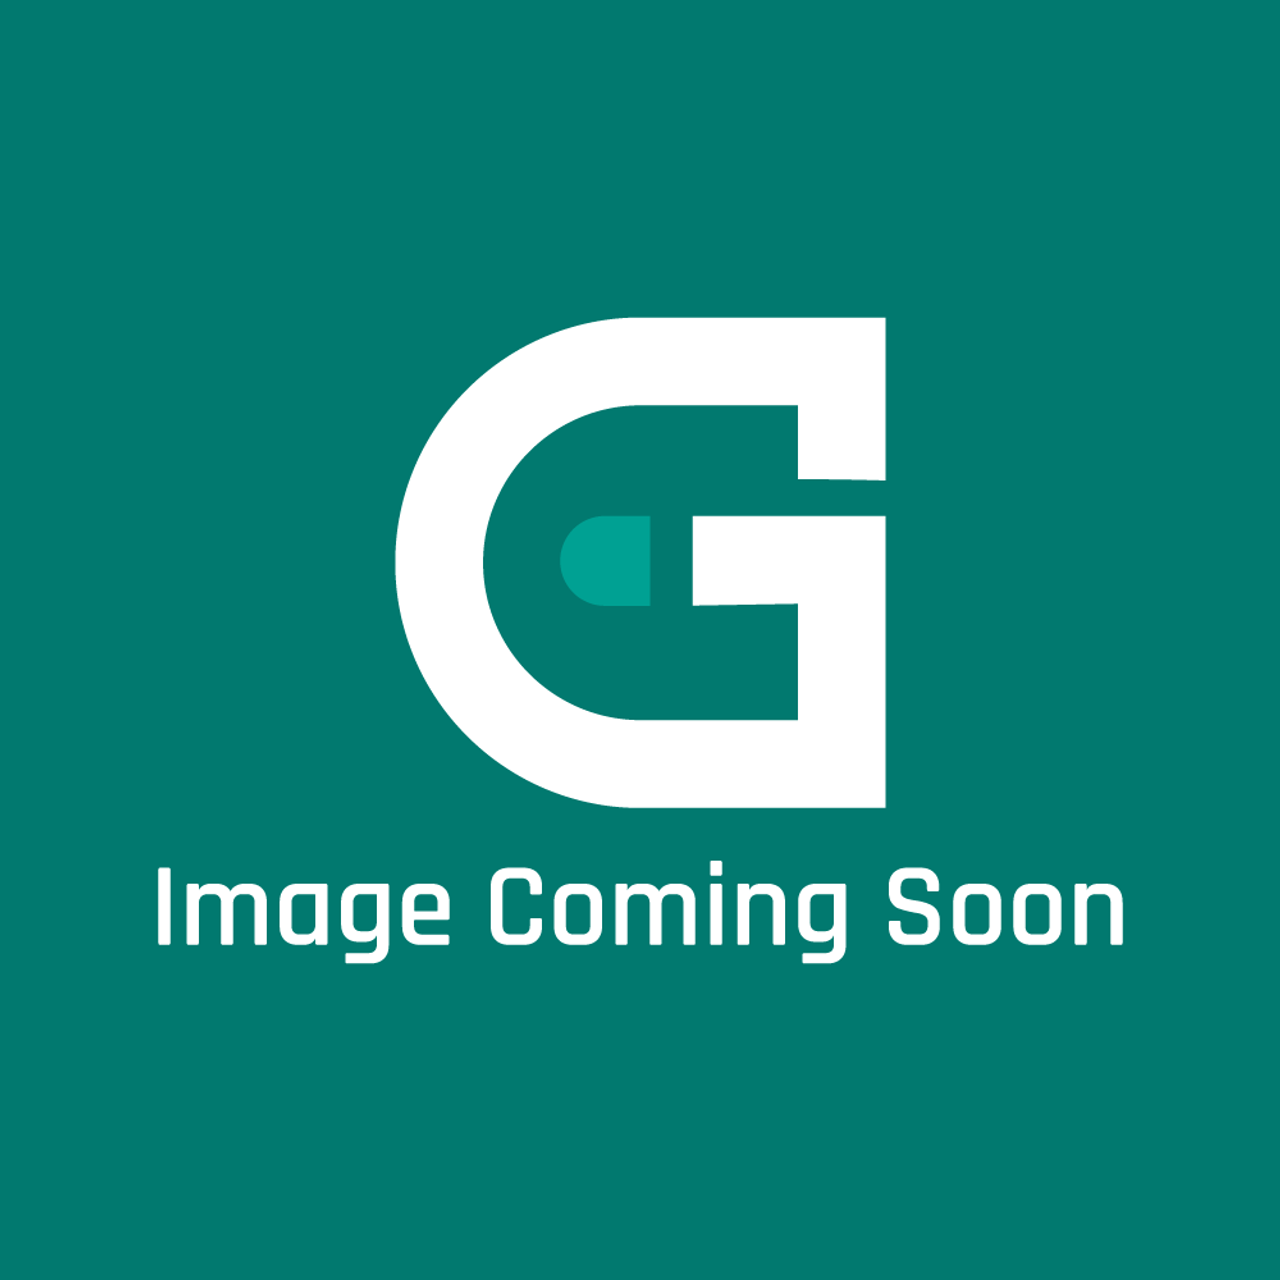 AGA Marvel 024791-0628 - Drawer Front Clamp Lh Deep - Image Coming Soon!